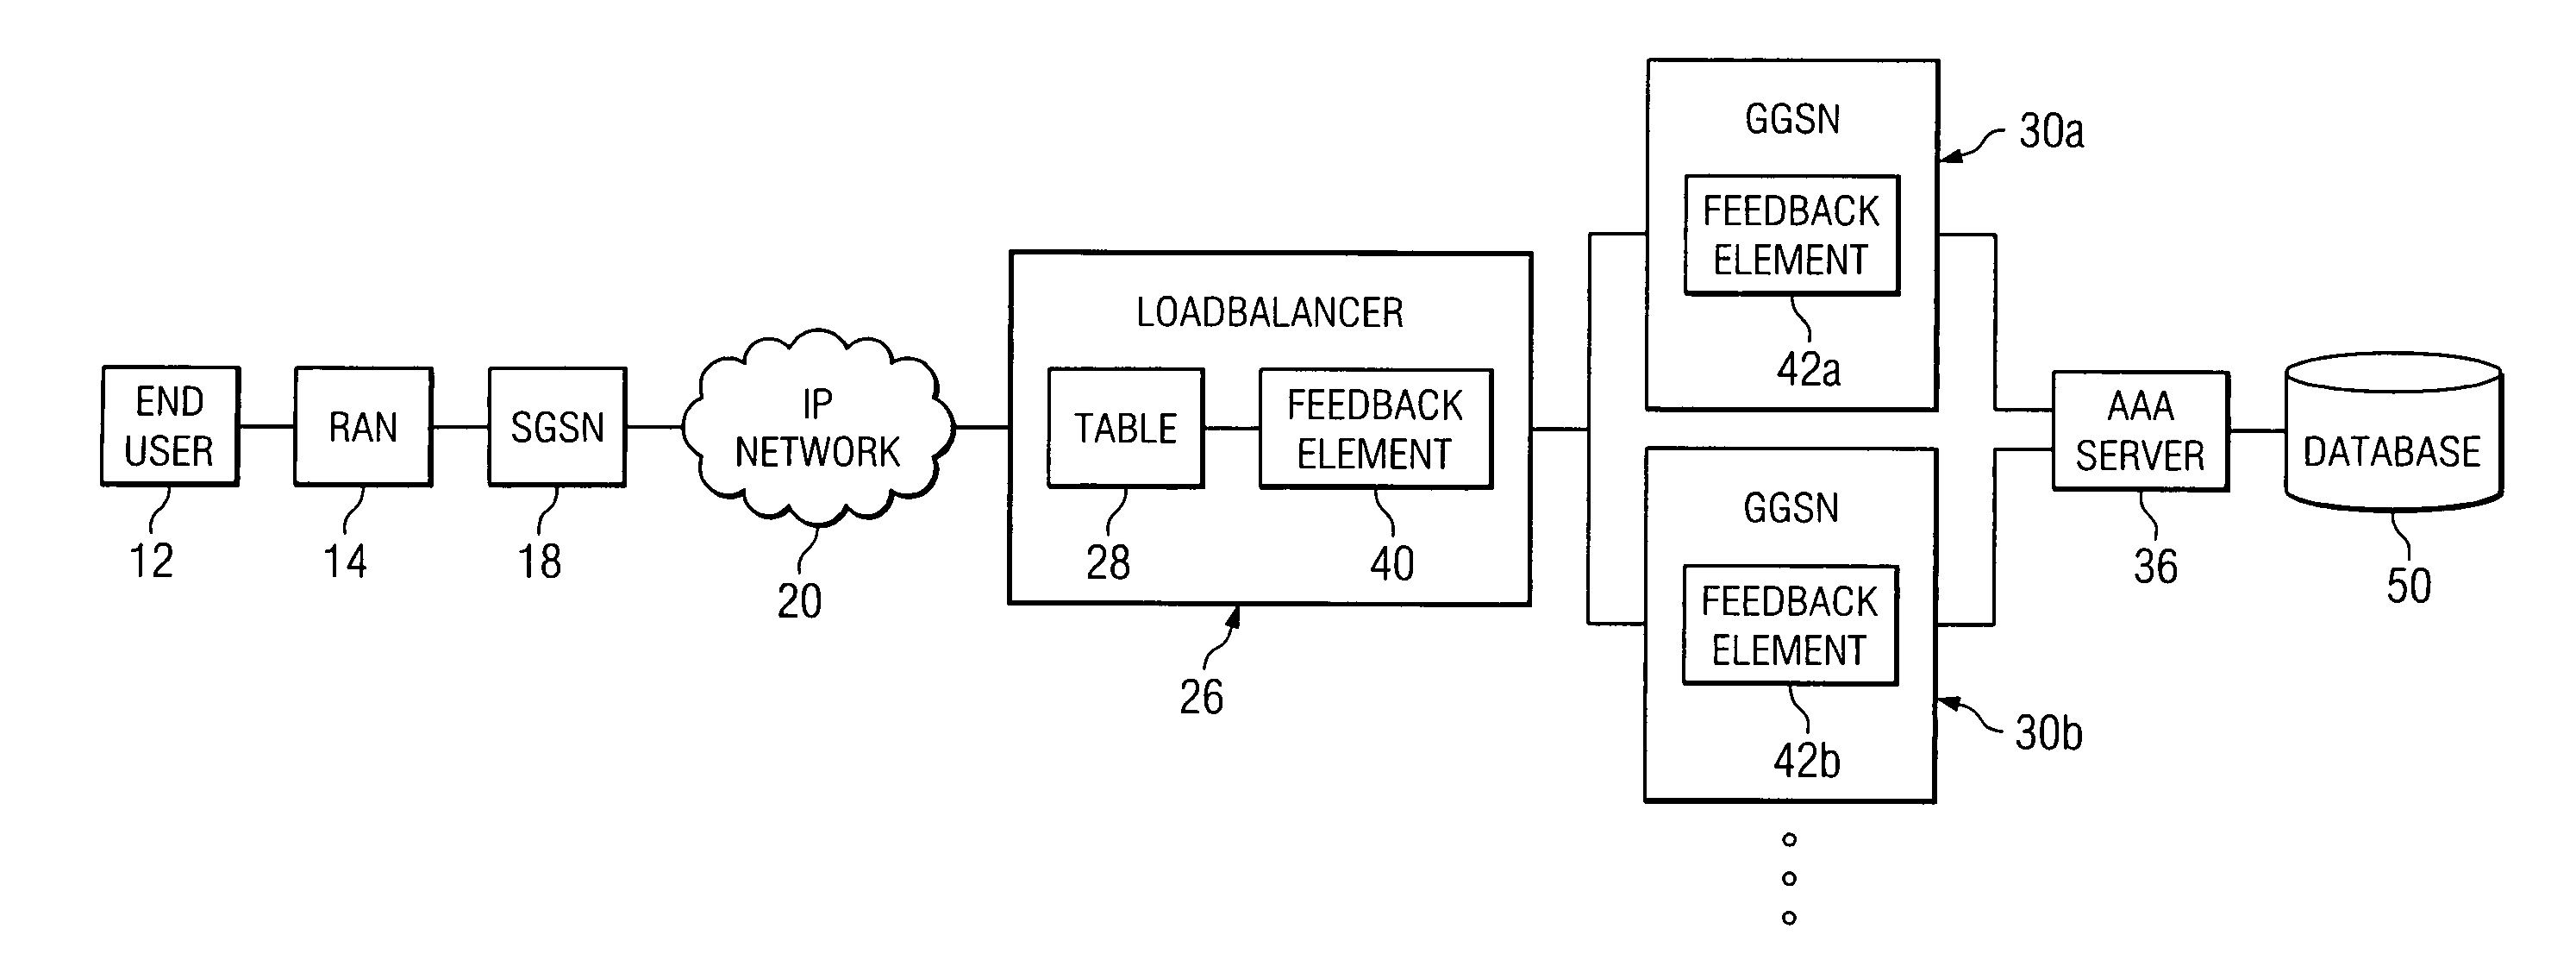 System and method for loadbalancing in a network environment using feedback information